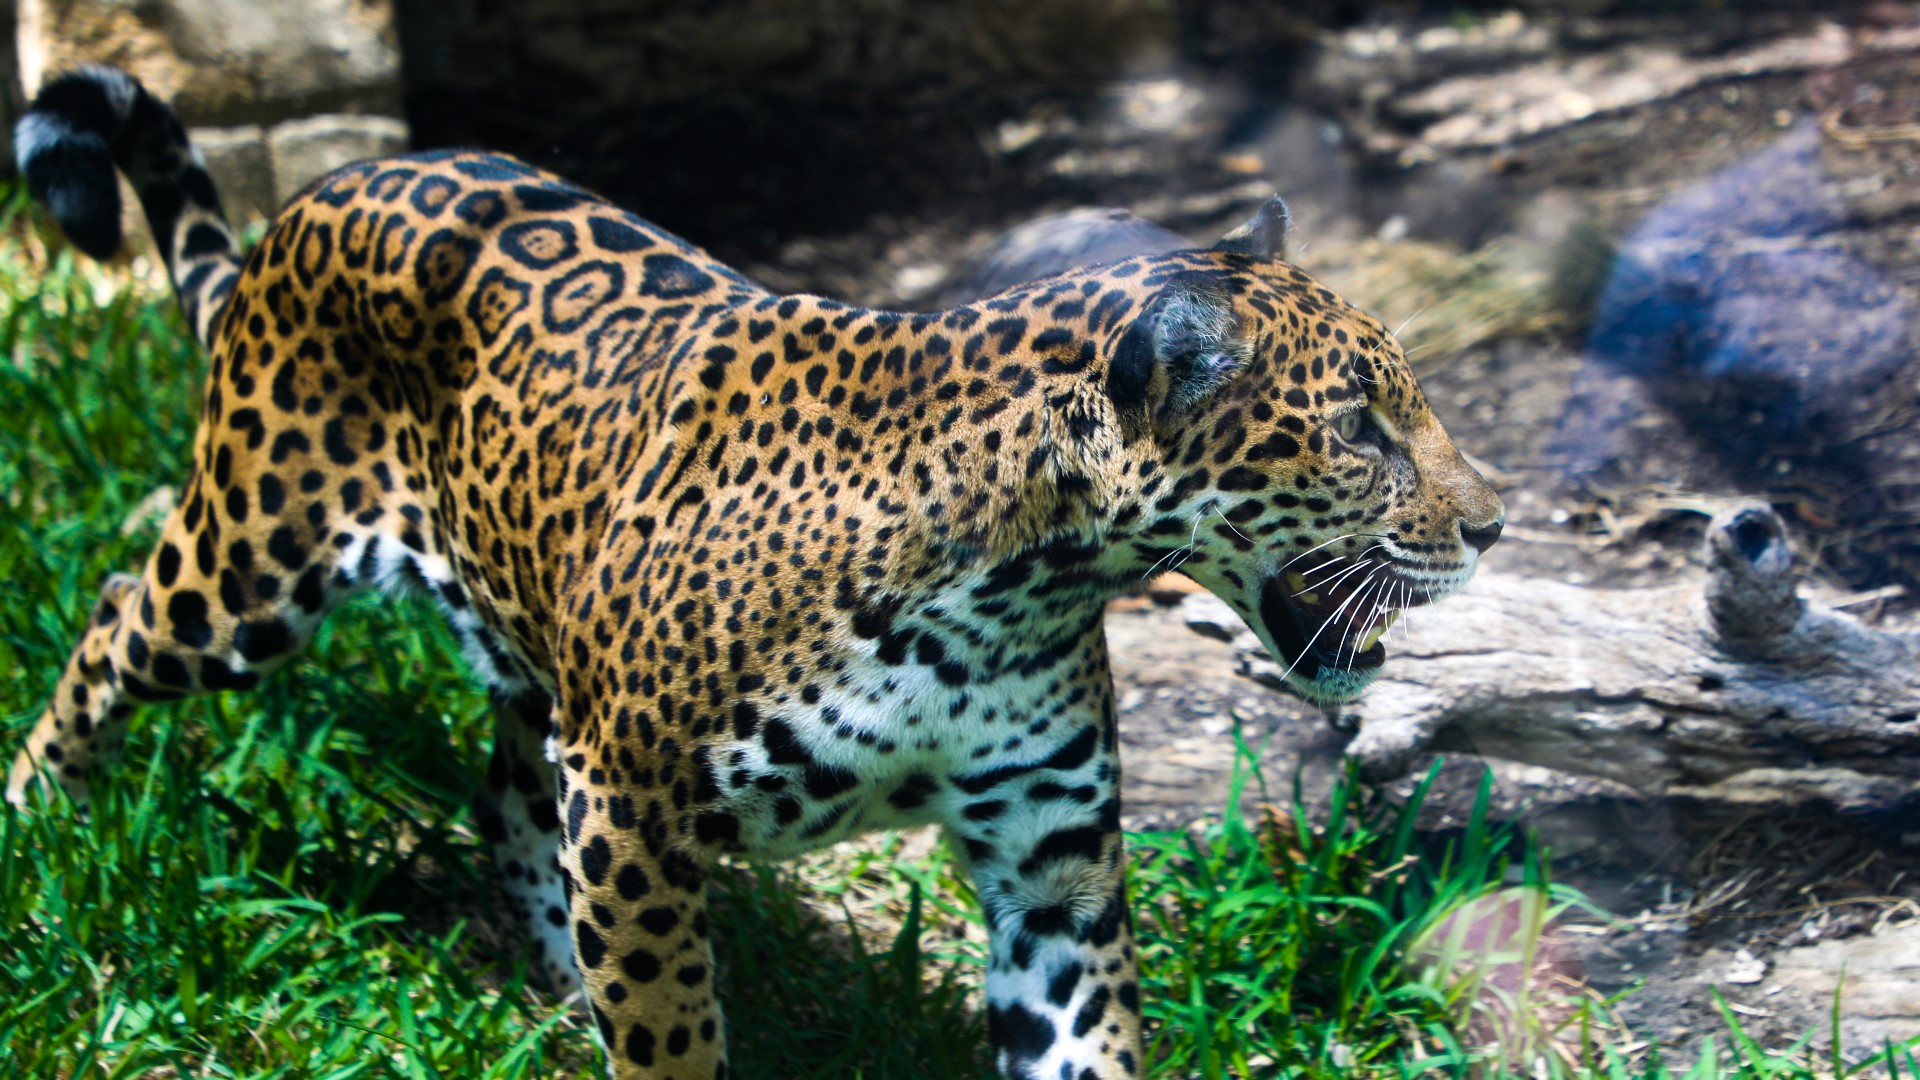 Monday, May 23, residents can visit the zoo for just $8 as part of PNC Bank Locals Day.